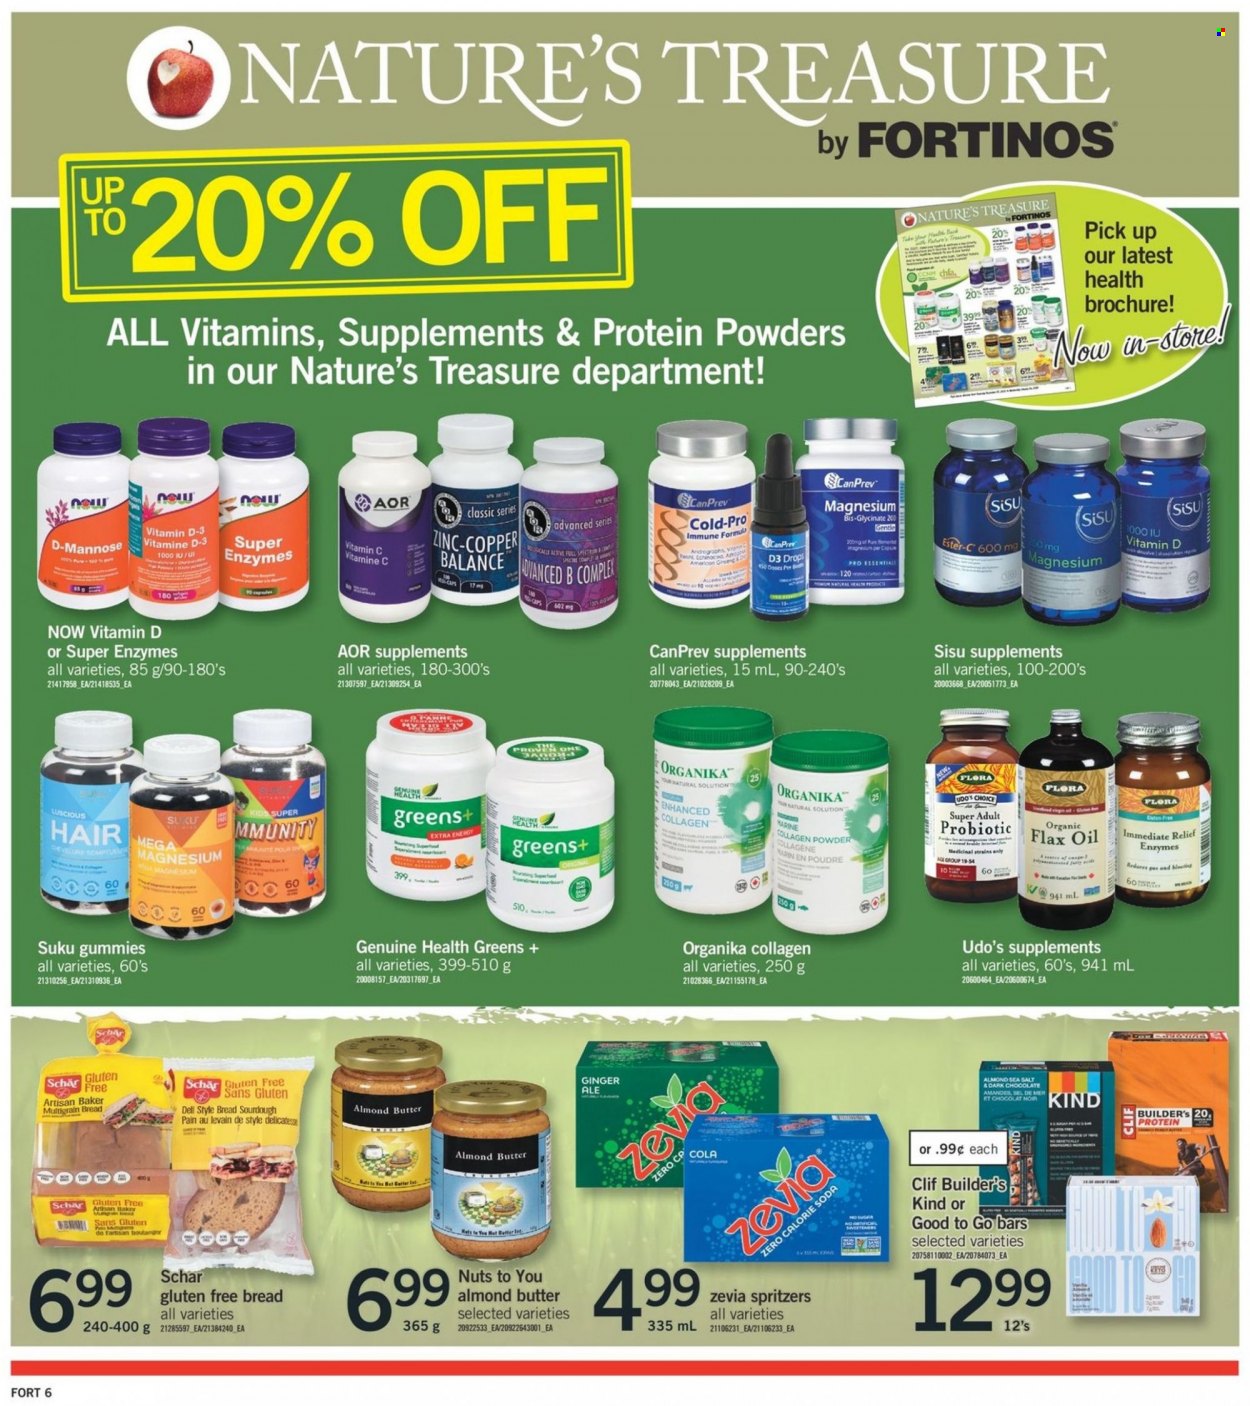 thumbnail - Fortinos Flyer - January 13, 2022 - January 19, 2022 - Sales products - bread, multigrain bread, ginger, Flora, almond butter, chocolate, dark chocolate, sea salt, oil, soda, Ester-c, magnesium, vitamin c, zinc, vitamin D3. Page 8.